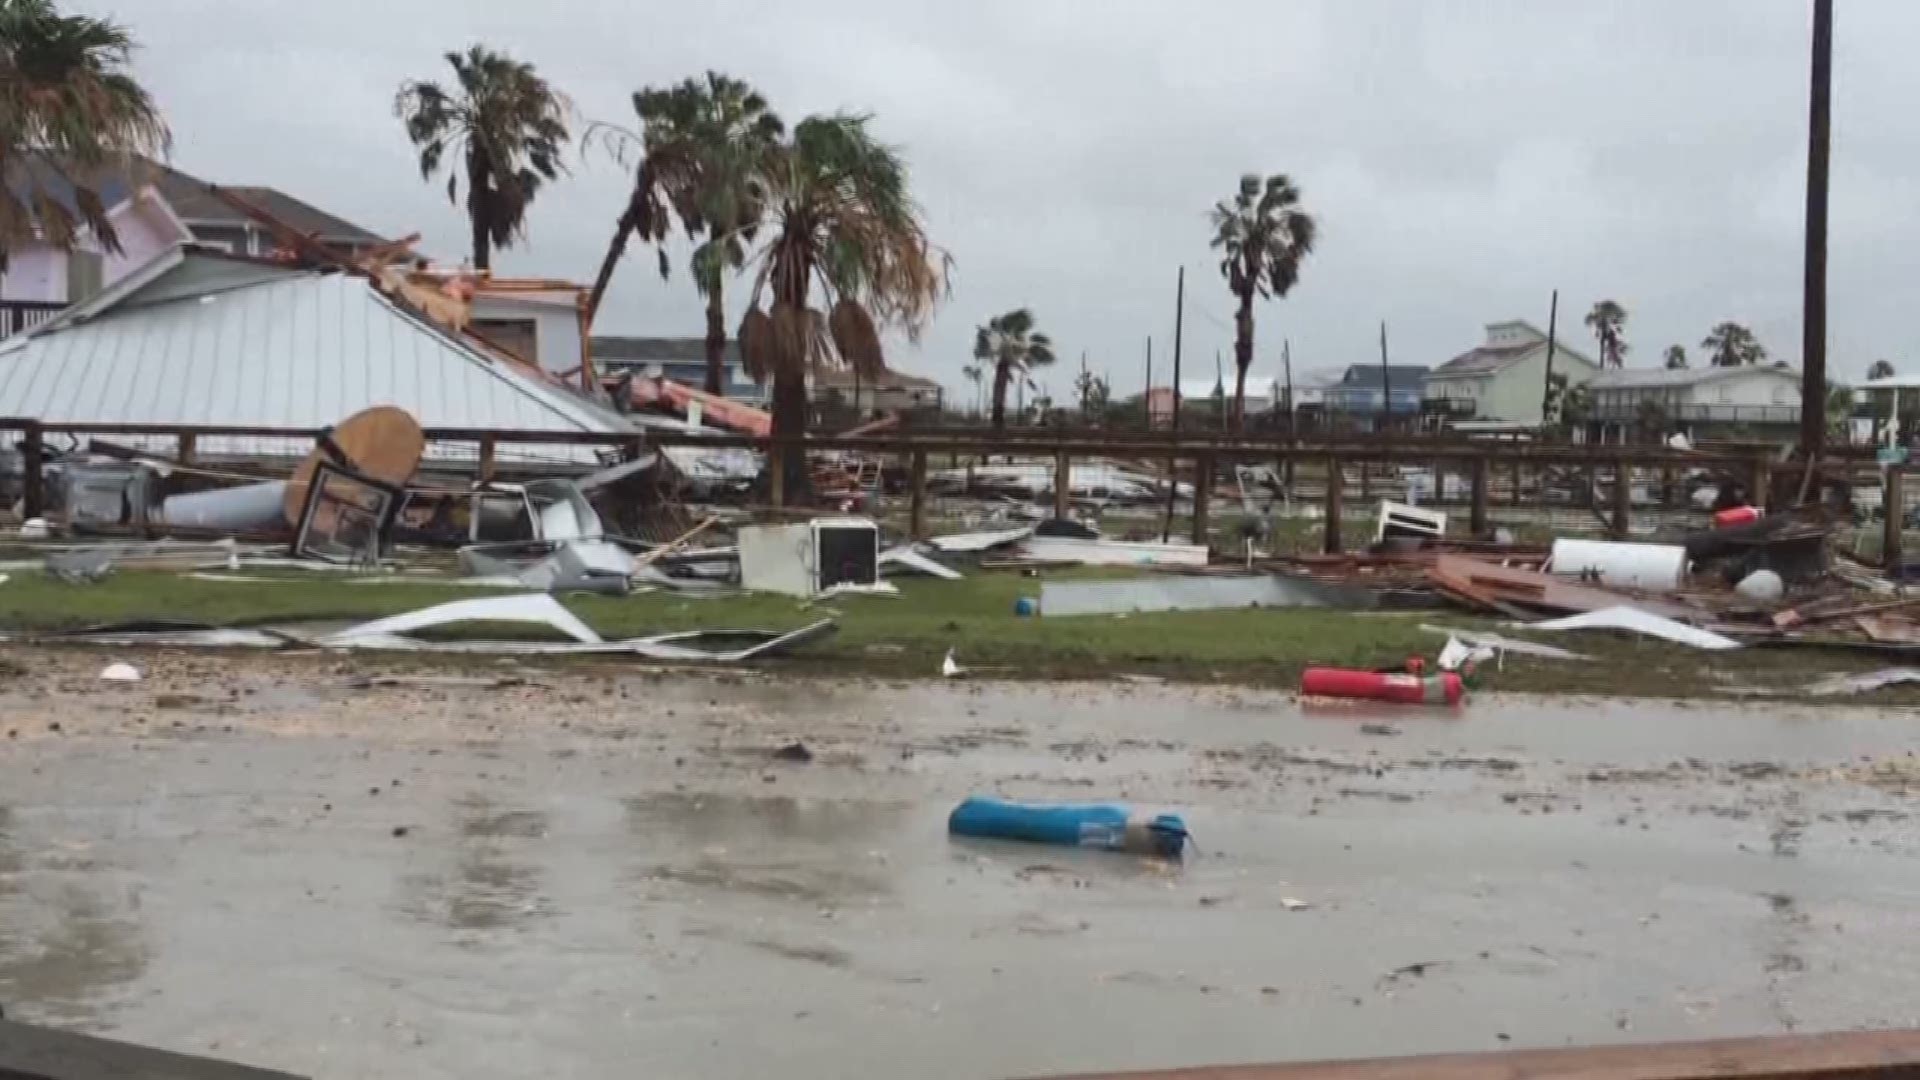 The coastal city of Rockport took a direct hit from Harvey. Many of the people who live or own property there are just now getting back to assess the damage.